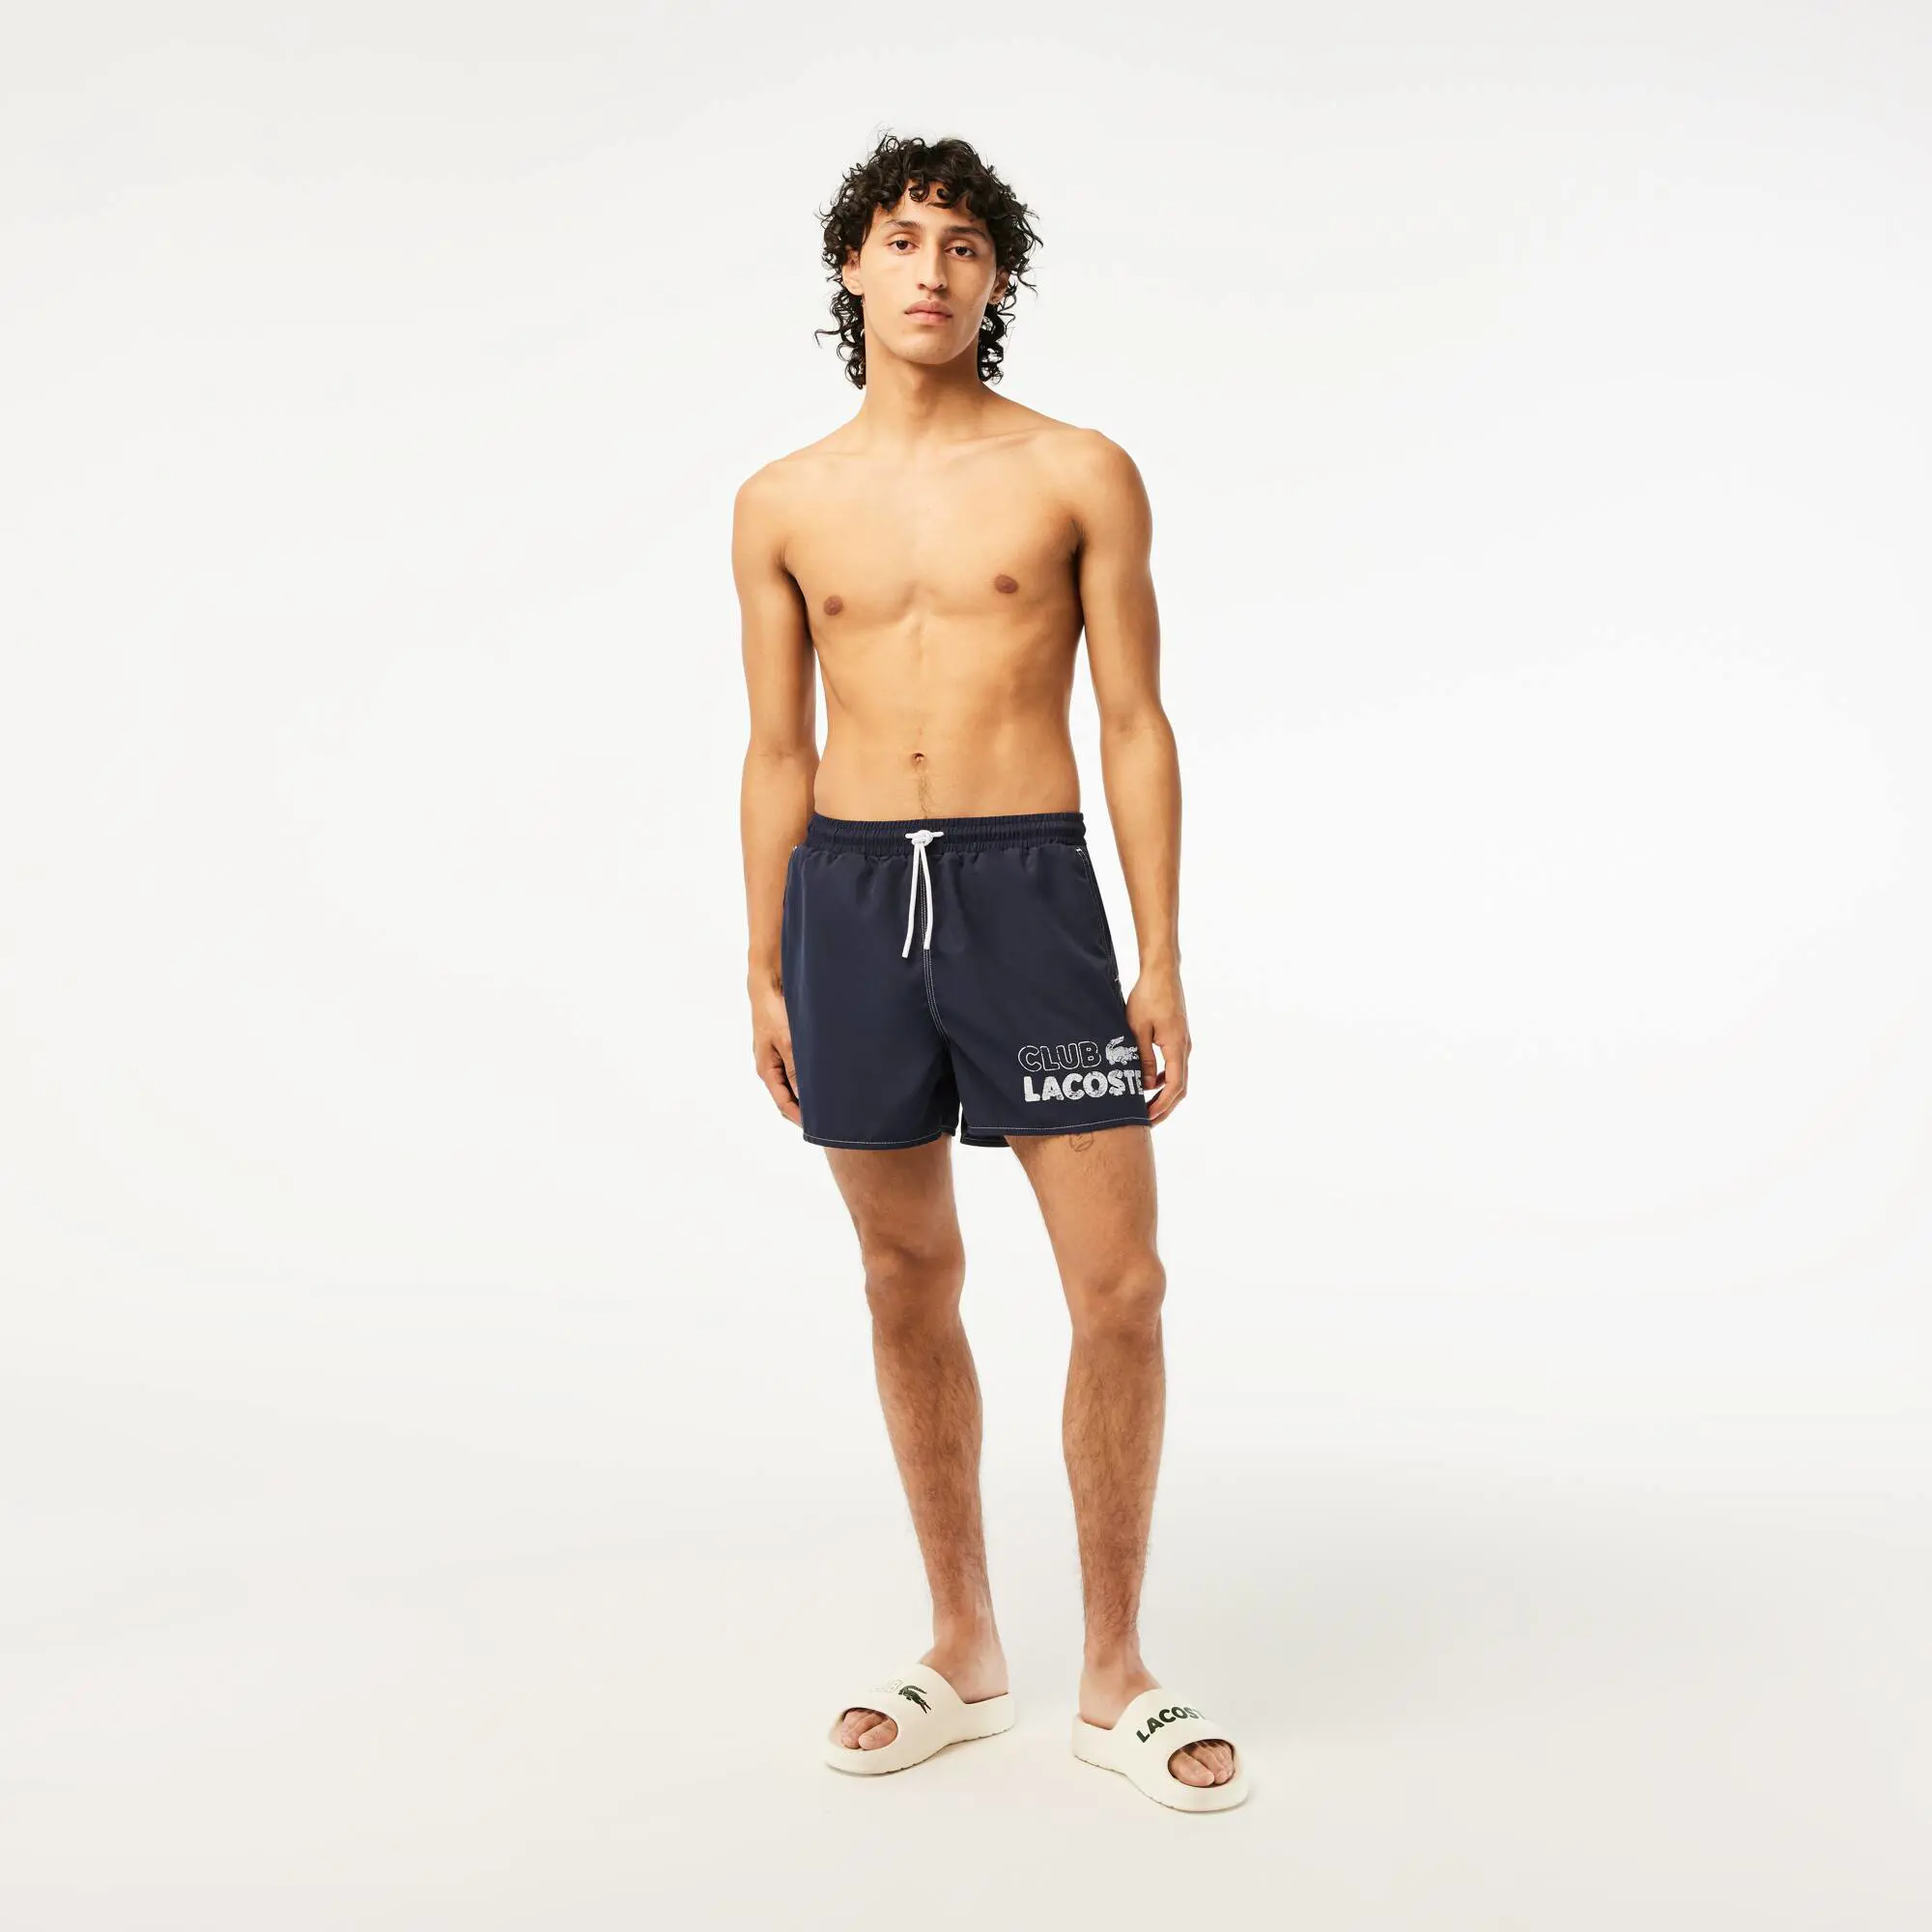 Lacoste Men’s Lacoste Quick Dry Swim Trunks with Integrated Lining. 1